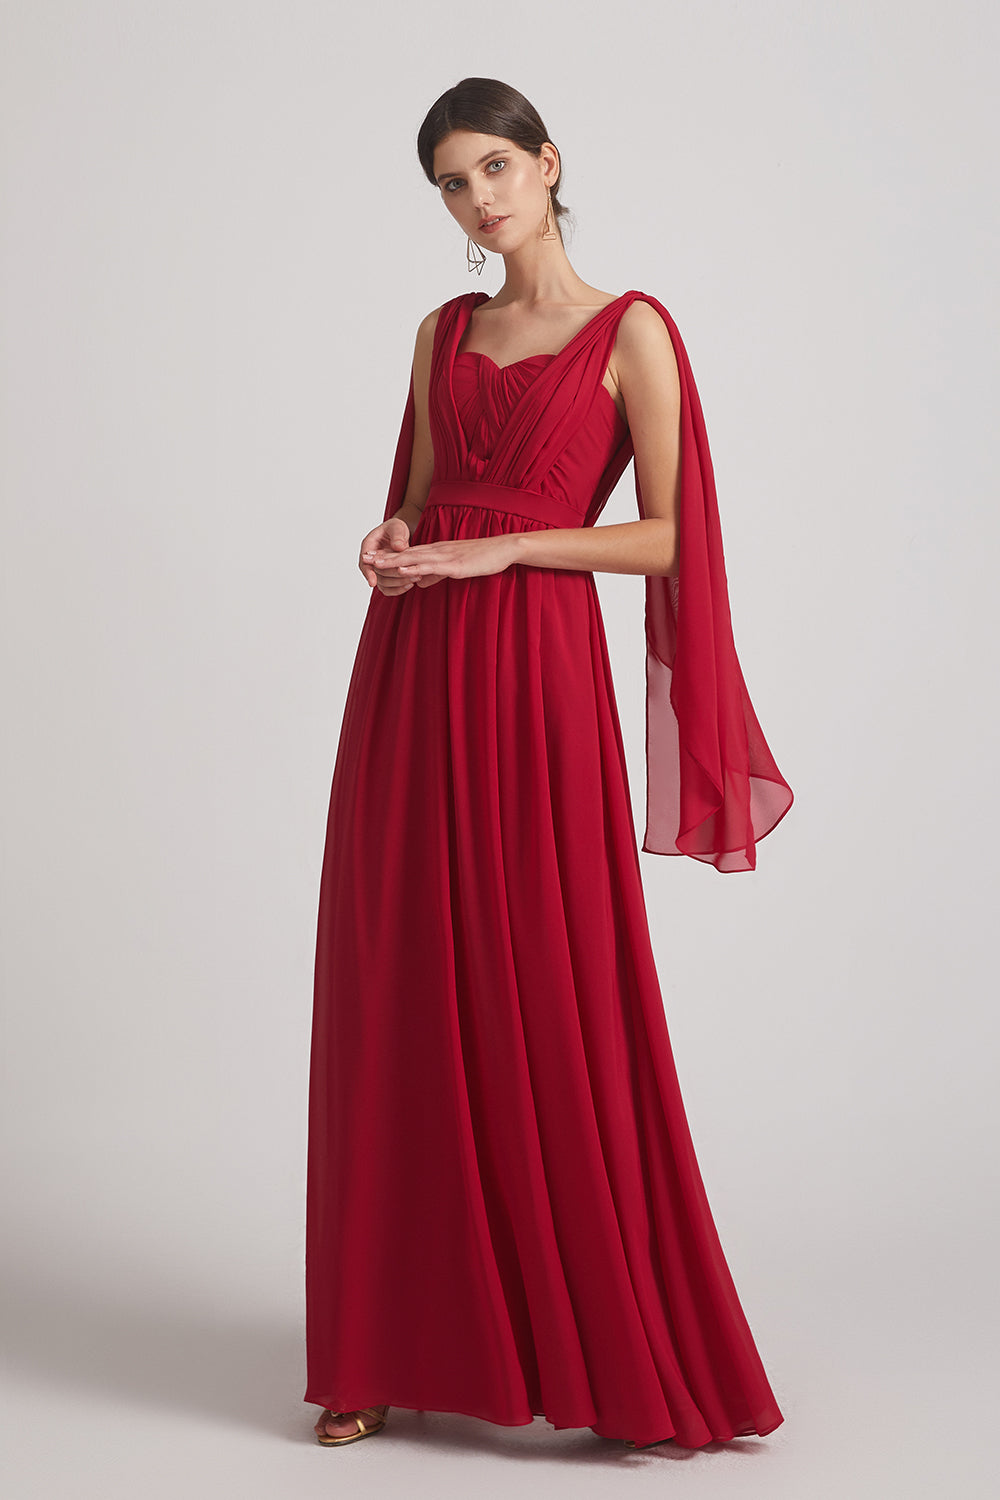 a-line red chiffon dresses for bridesmaid 